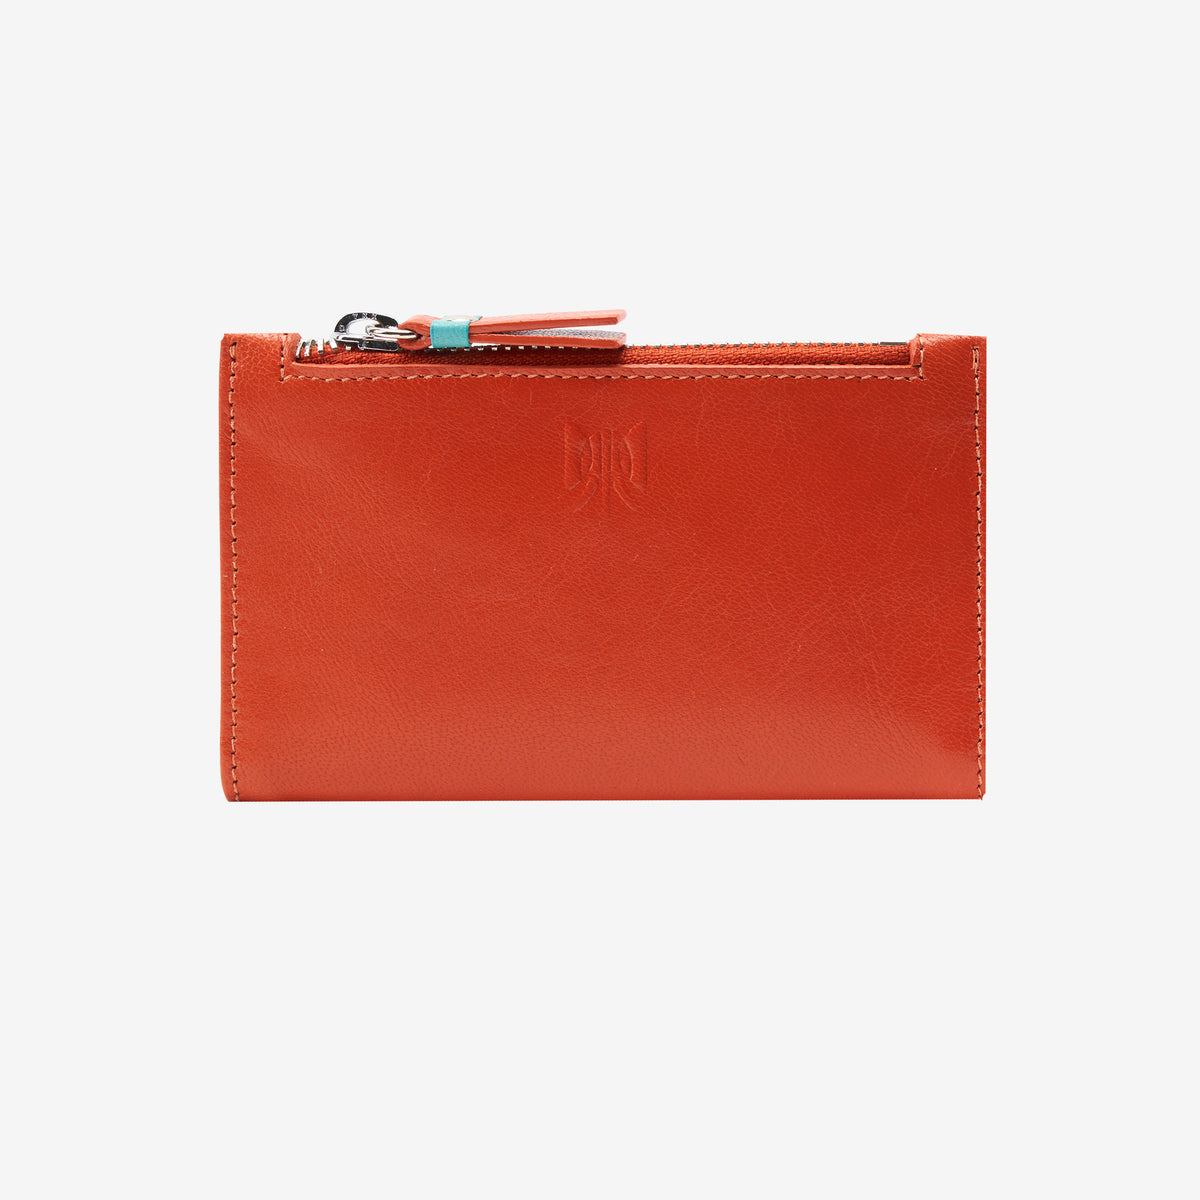     tusk-383-leather-slim-card-case-with-zip-coin-pocket-orange-and-sky-front